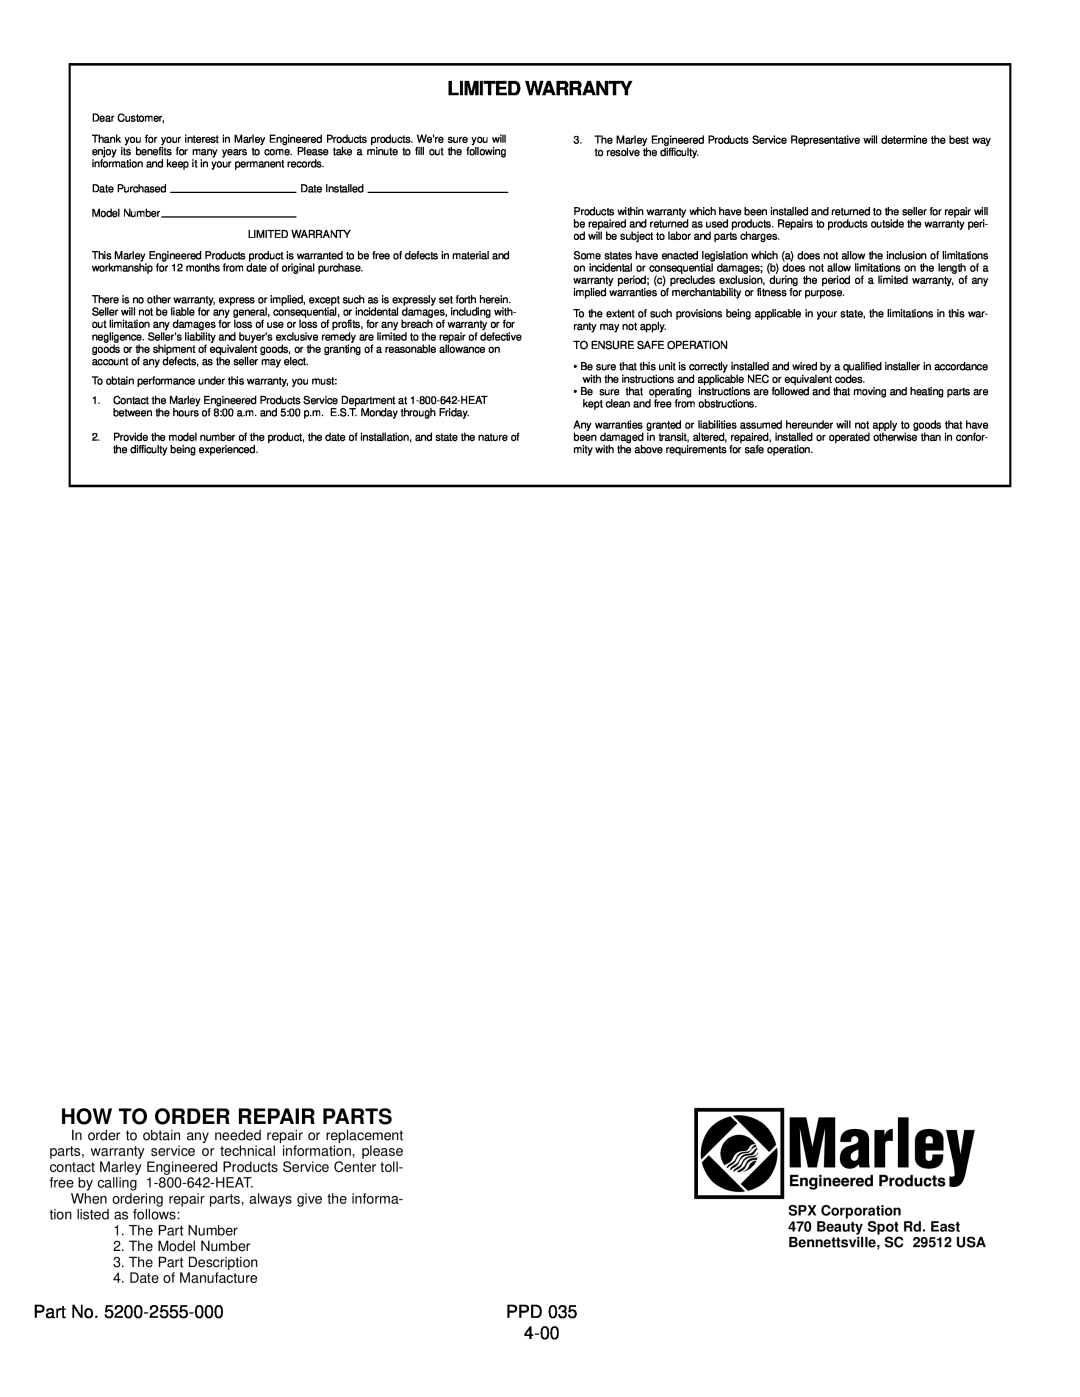 Marley Engineered Products 3638R, 2438, 3038R manual How To Order Repair Parts, Limited Warranty, Serial Number 